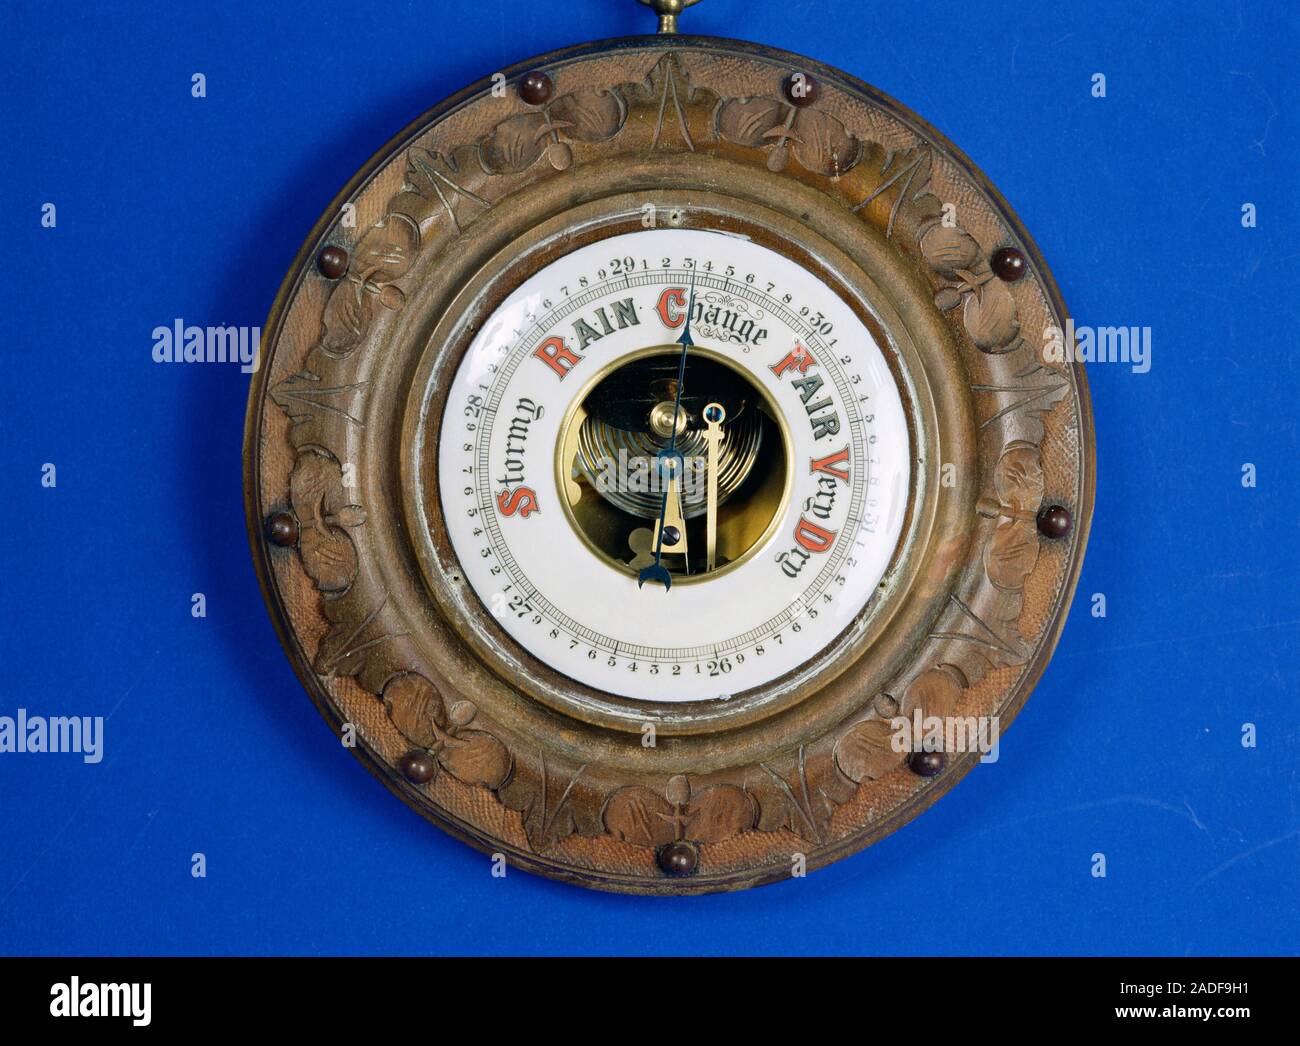 Aneroid barometer, used to measure atmospheric pressure and forecast weather. The barometer is displaying a reading of around 29.3 inches of mercury, Stock Photo